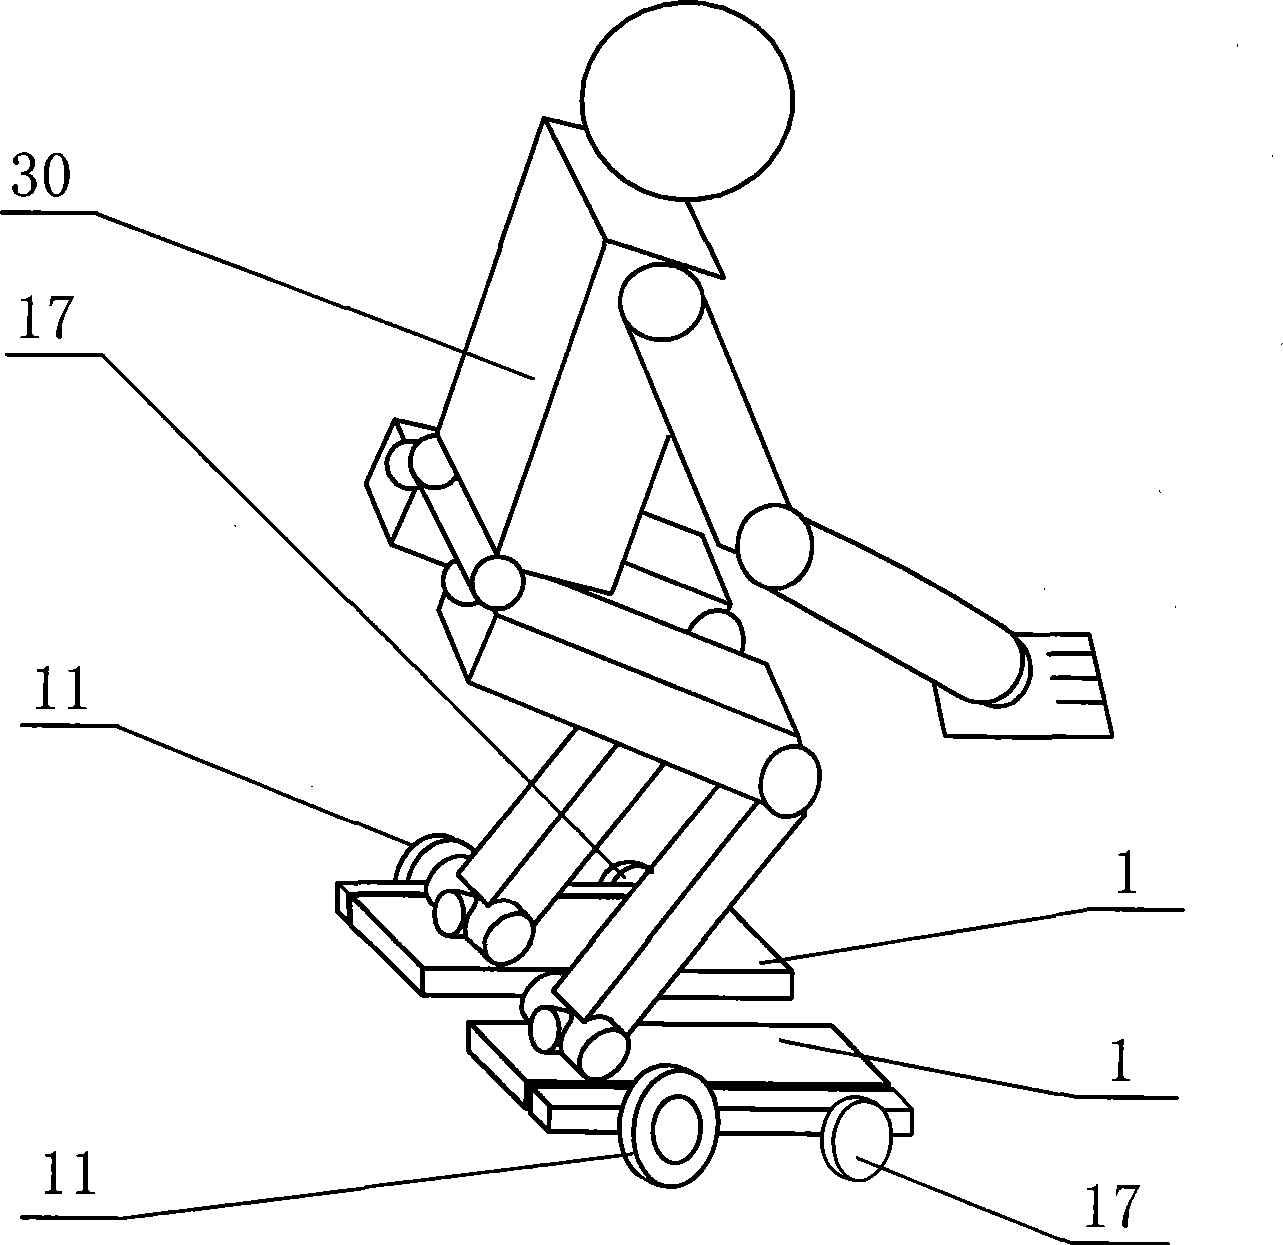 Wheeled mobile device for foot for humanoid robot, polypodia walking vehicle